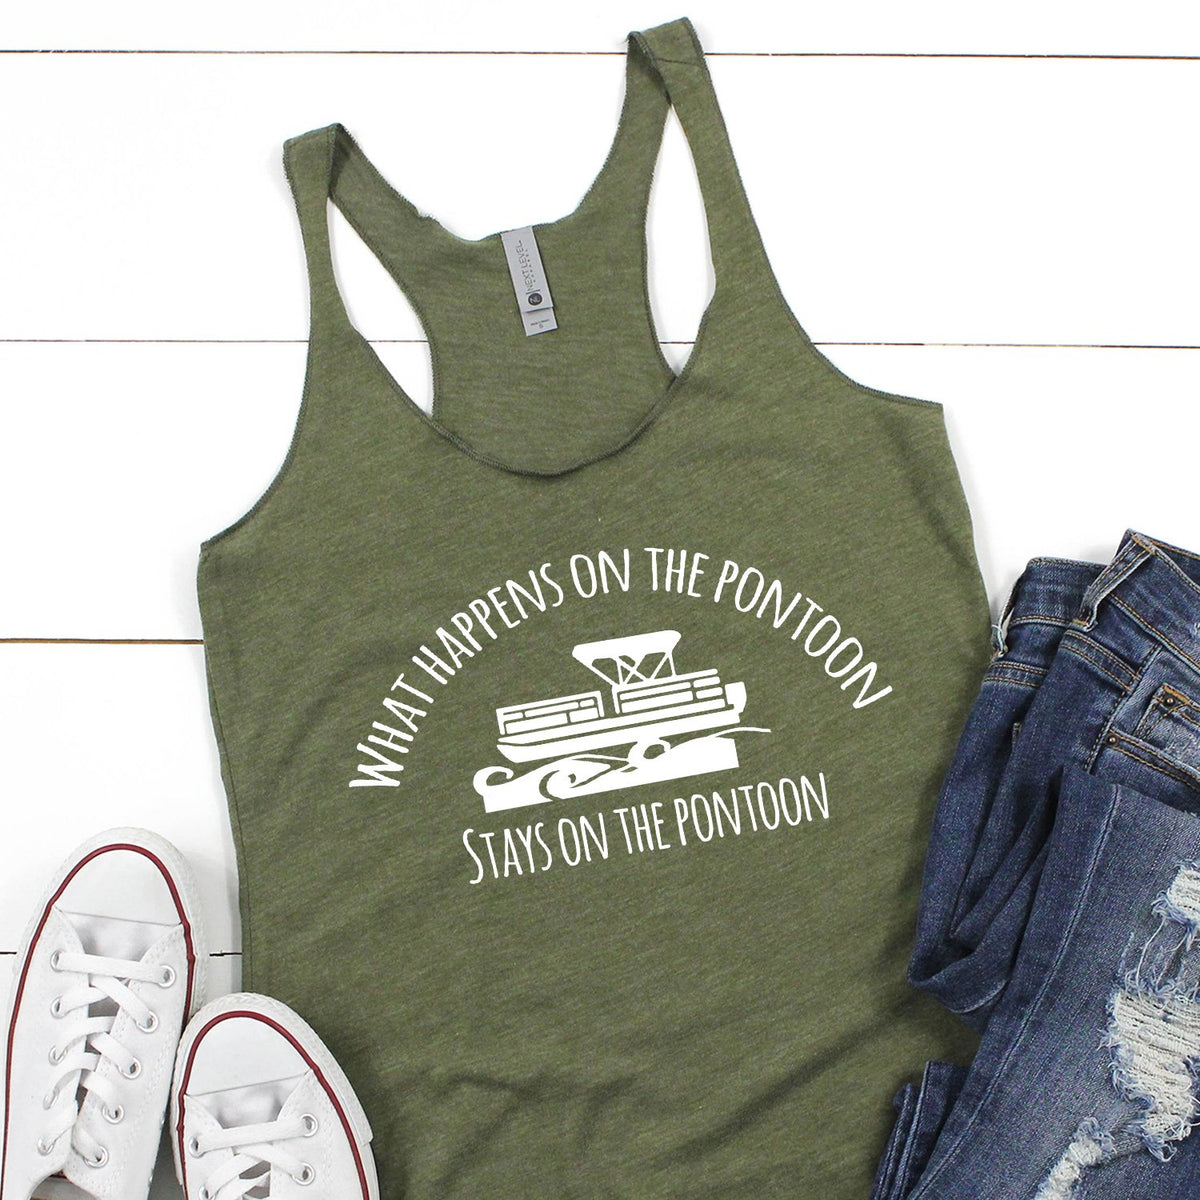 What Happens on the Pontoon Stays on the Pontoon - Tank Top Racerback